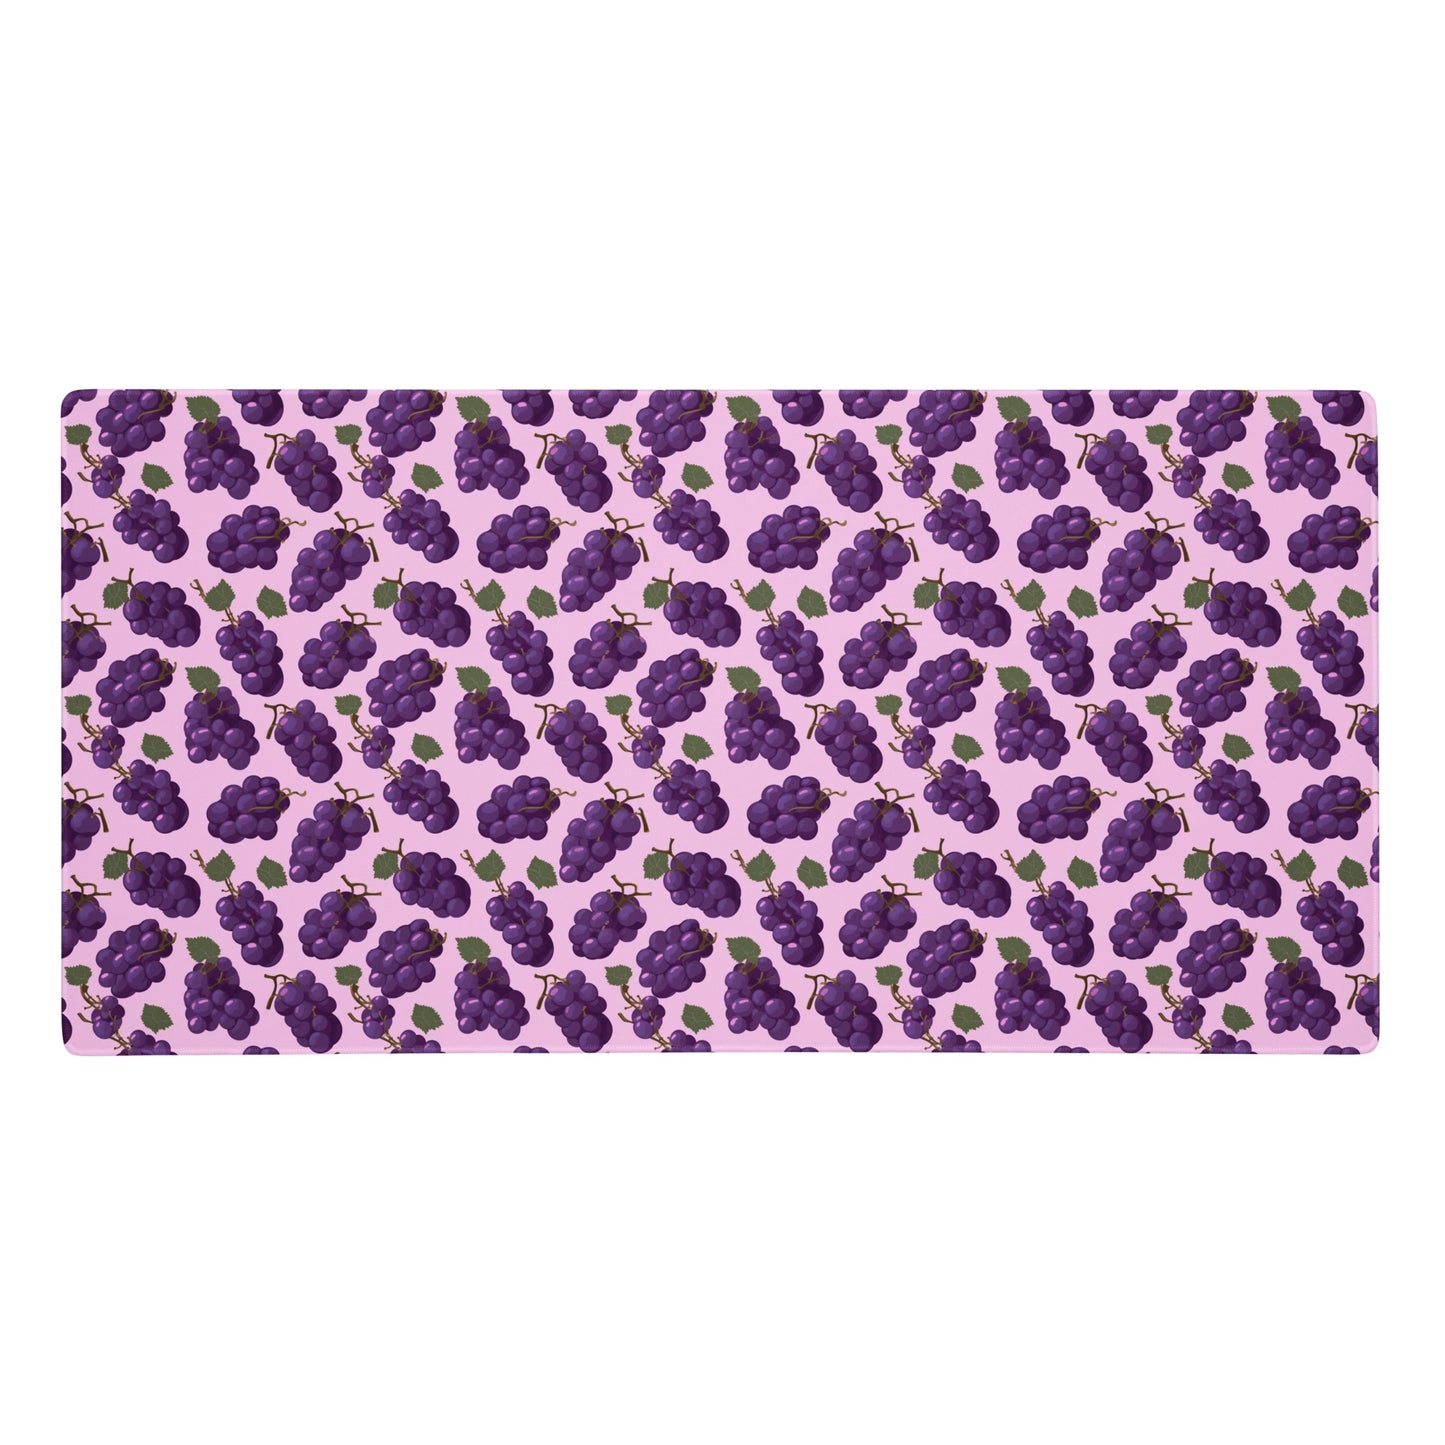 A 36" x 18" desk pad with bushels of grapes all over it. Purple in color.